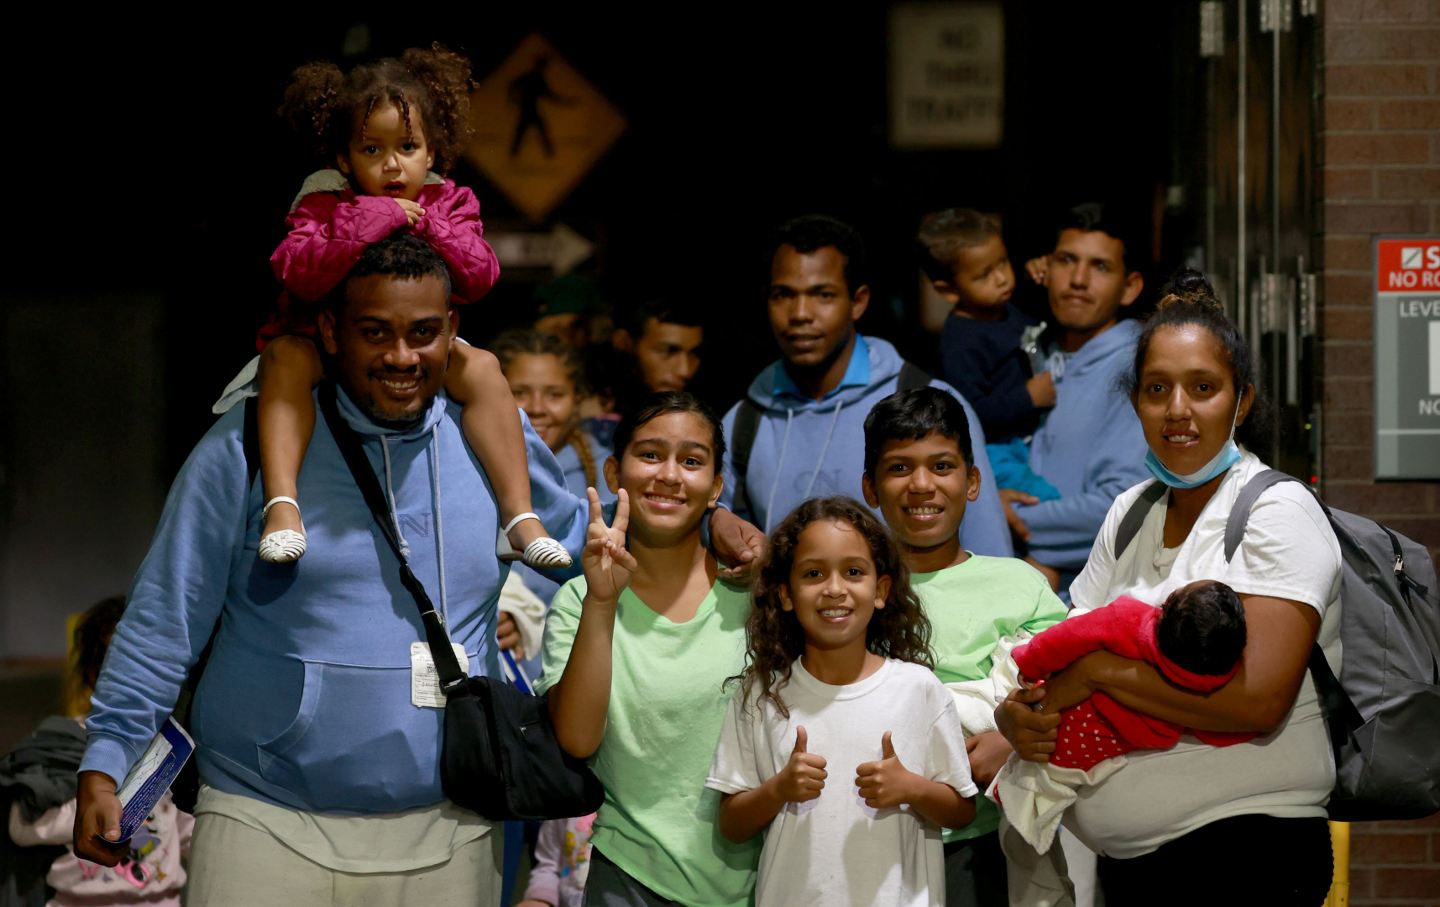 Seven members of the Cumales/Suarez family (kids aged 13, 12, 8, and 3 years, and one a month old) from Venezuela arrive from Texas at New York City’s Port Authority Bus Terminal early Wednesday, September 6, 2023.